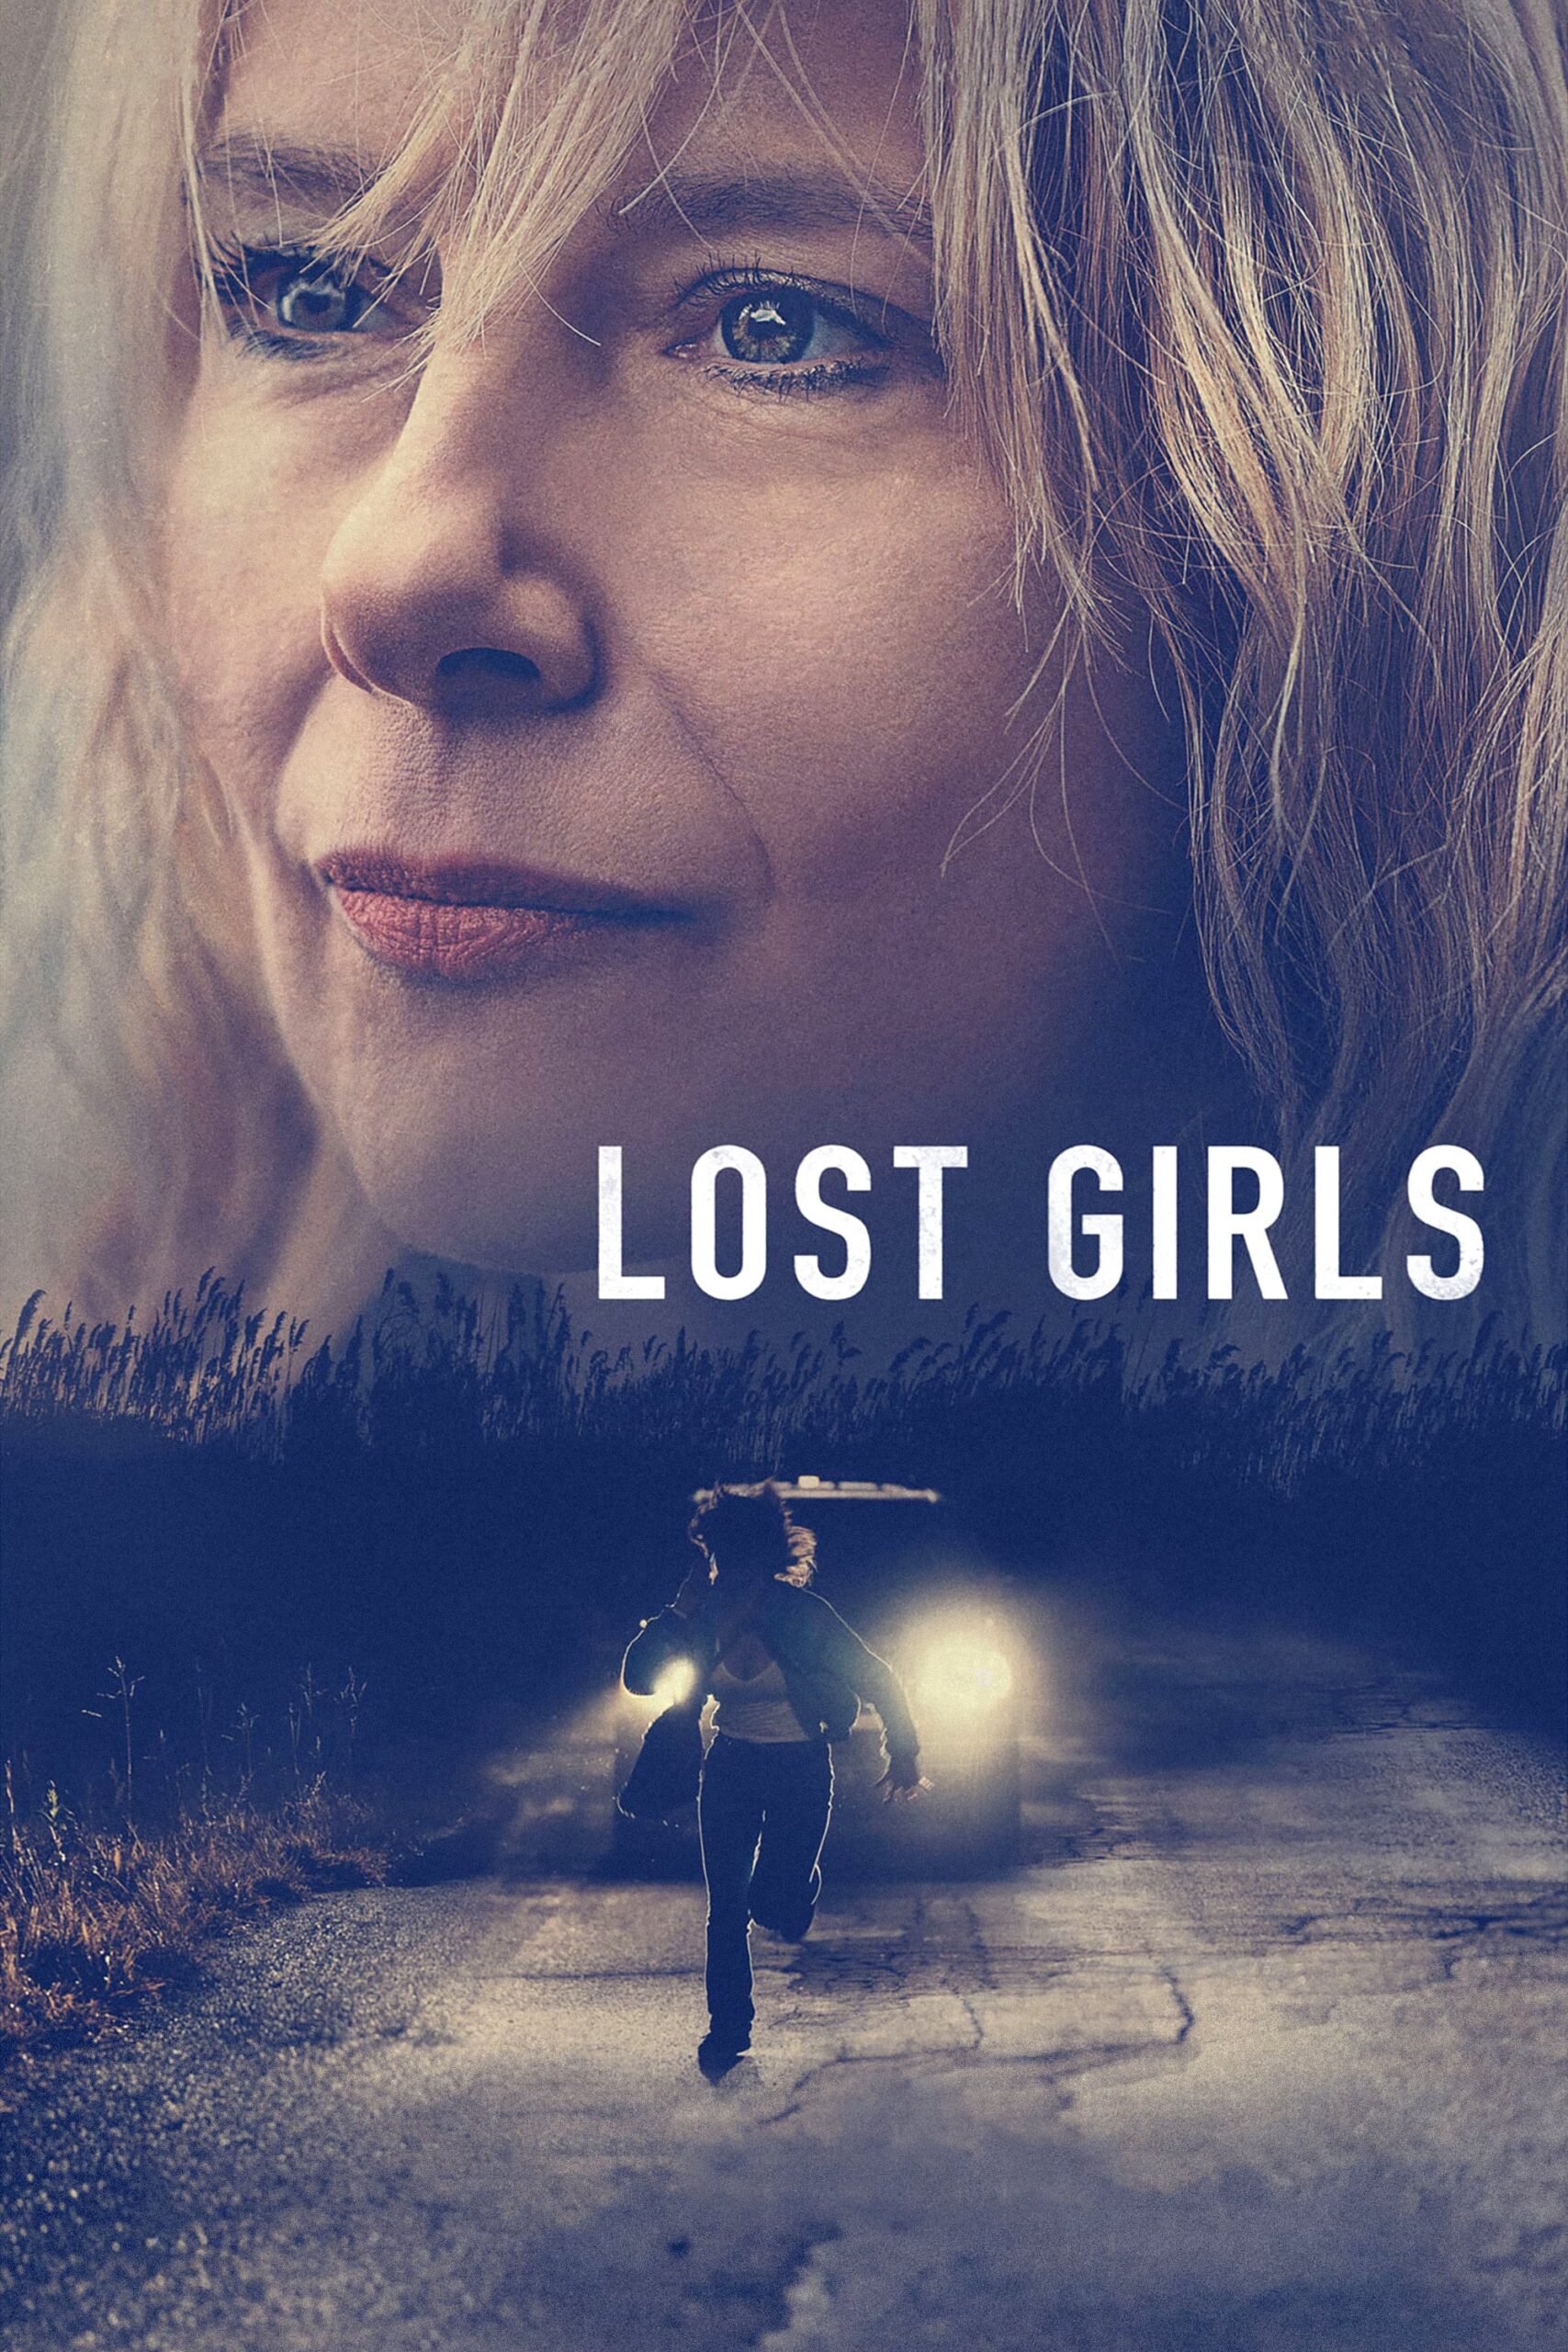 Lost Girls movie review